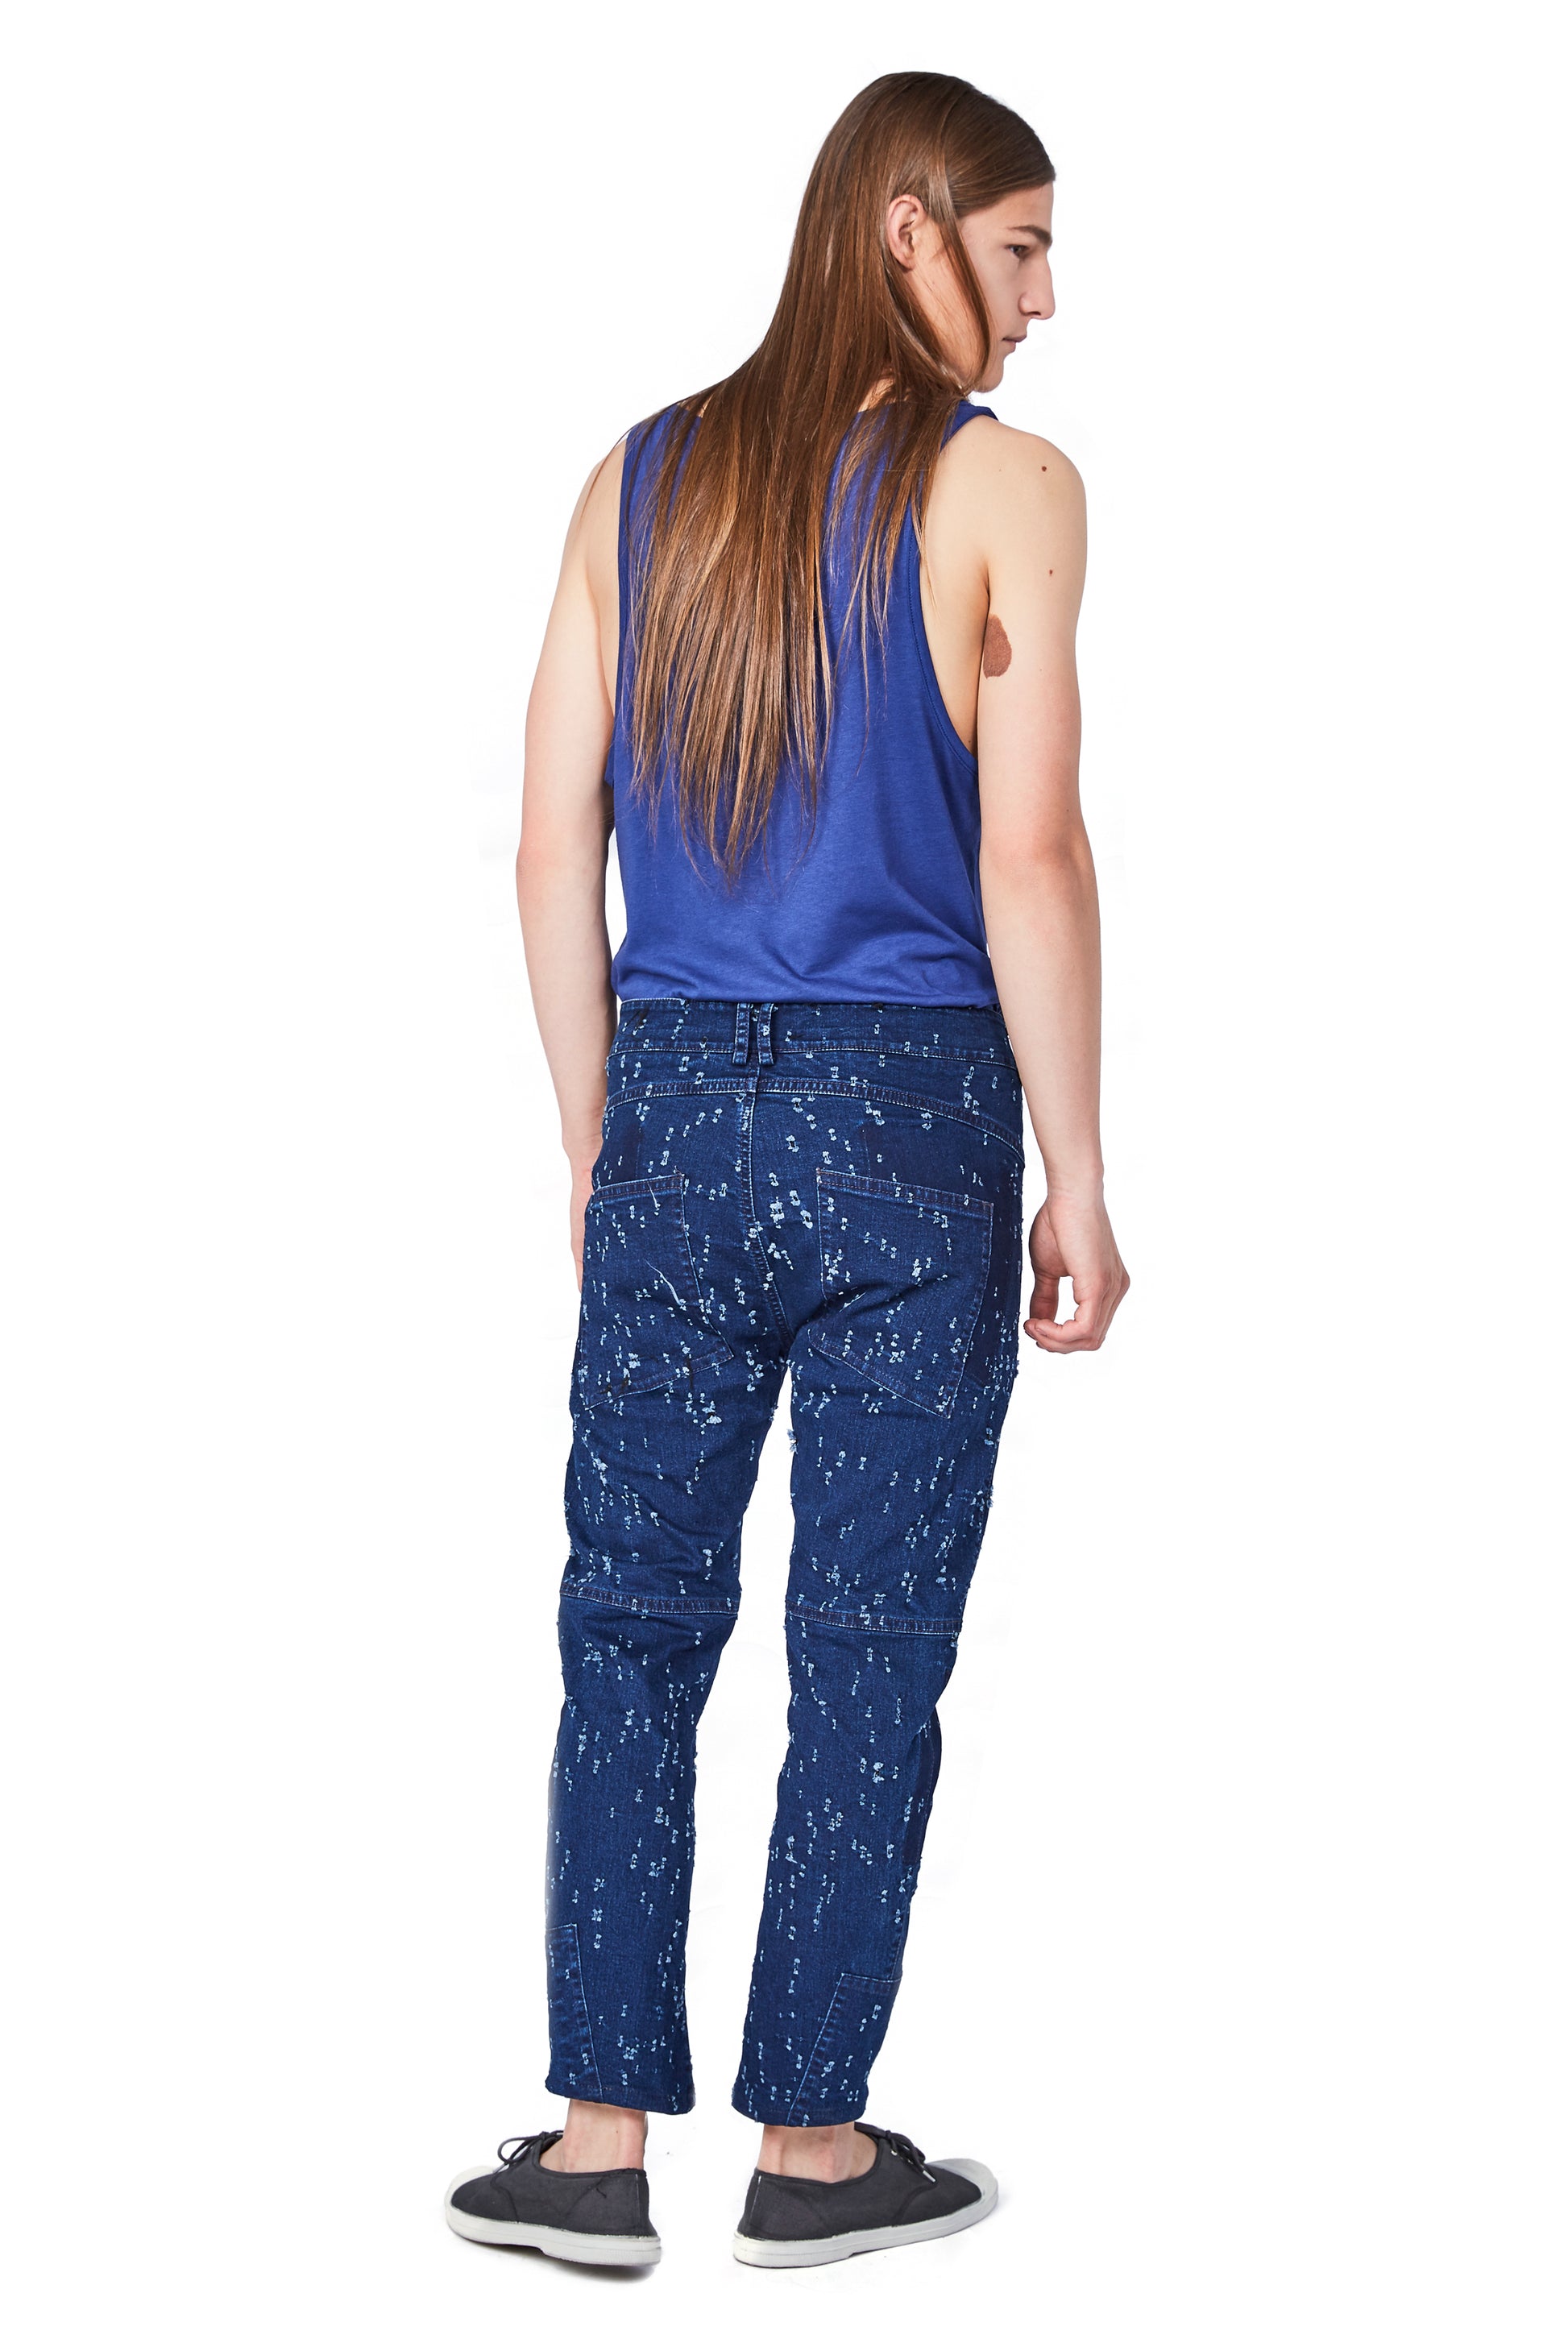 HOLEY unisex jeans - One Wolf